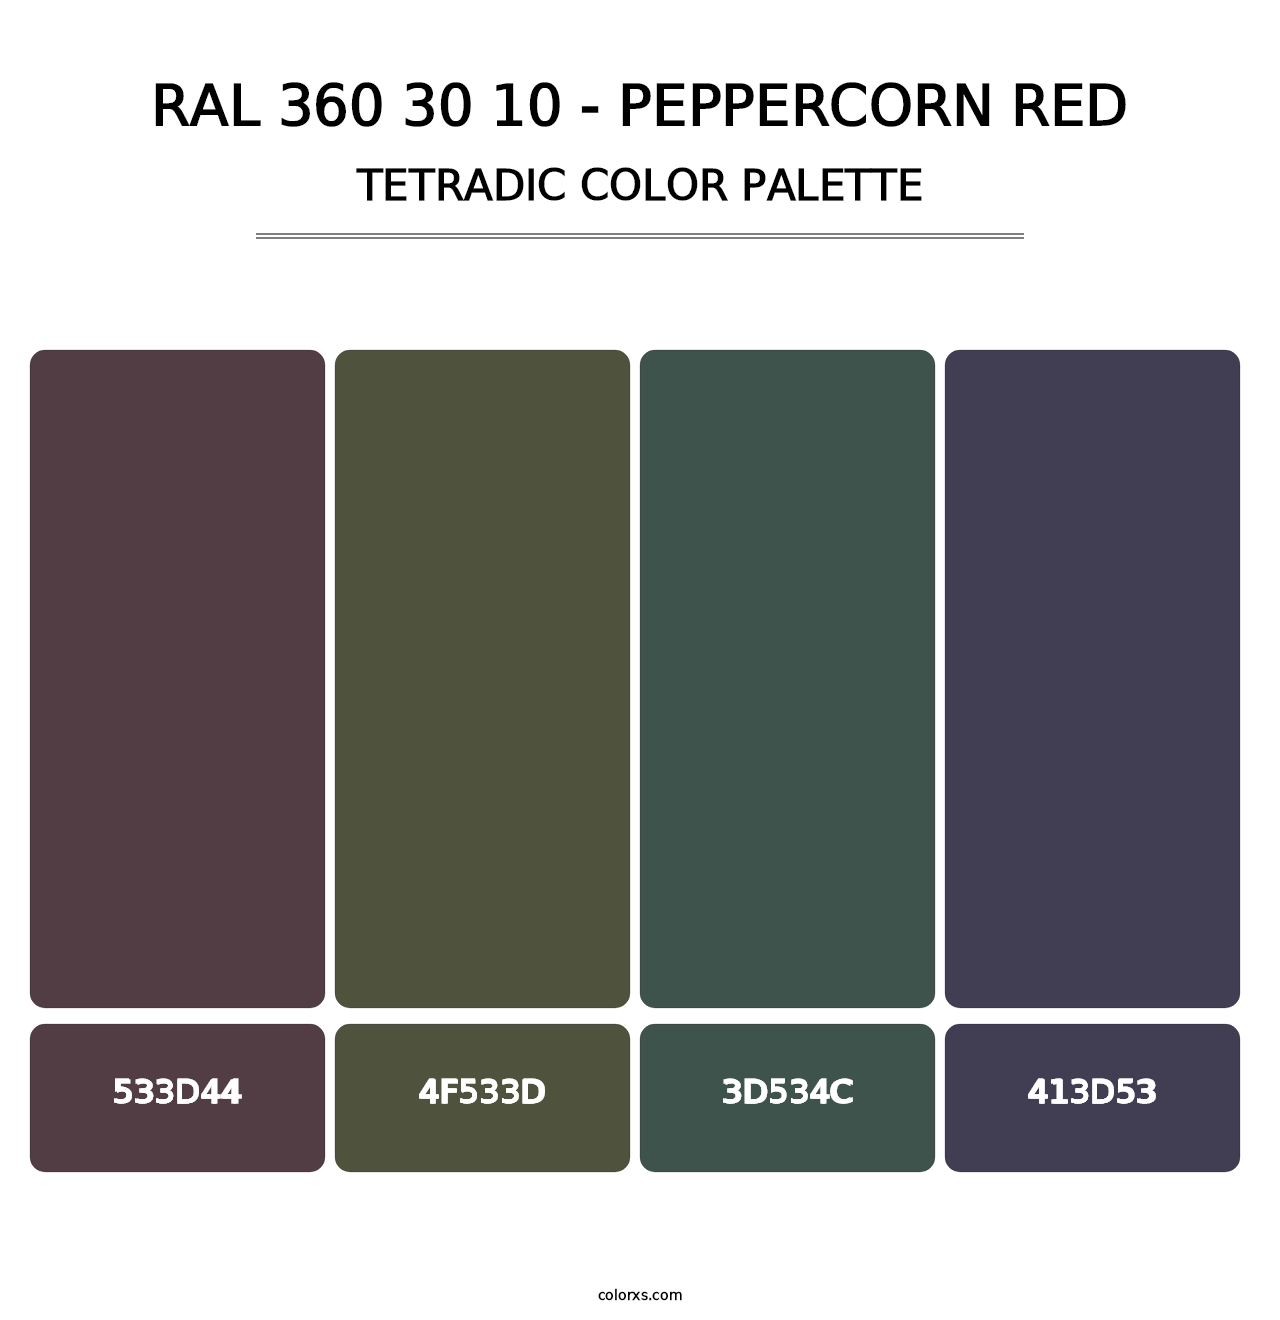 RAL 360 30 10 - Peppercorn Red - Tetradic Color Palette